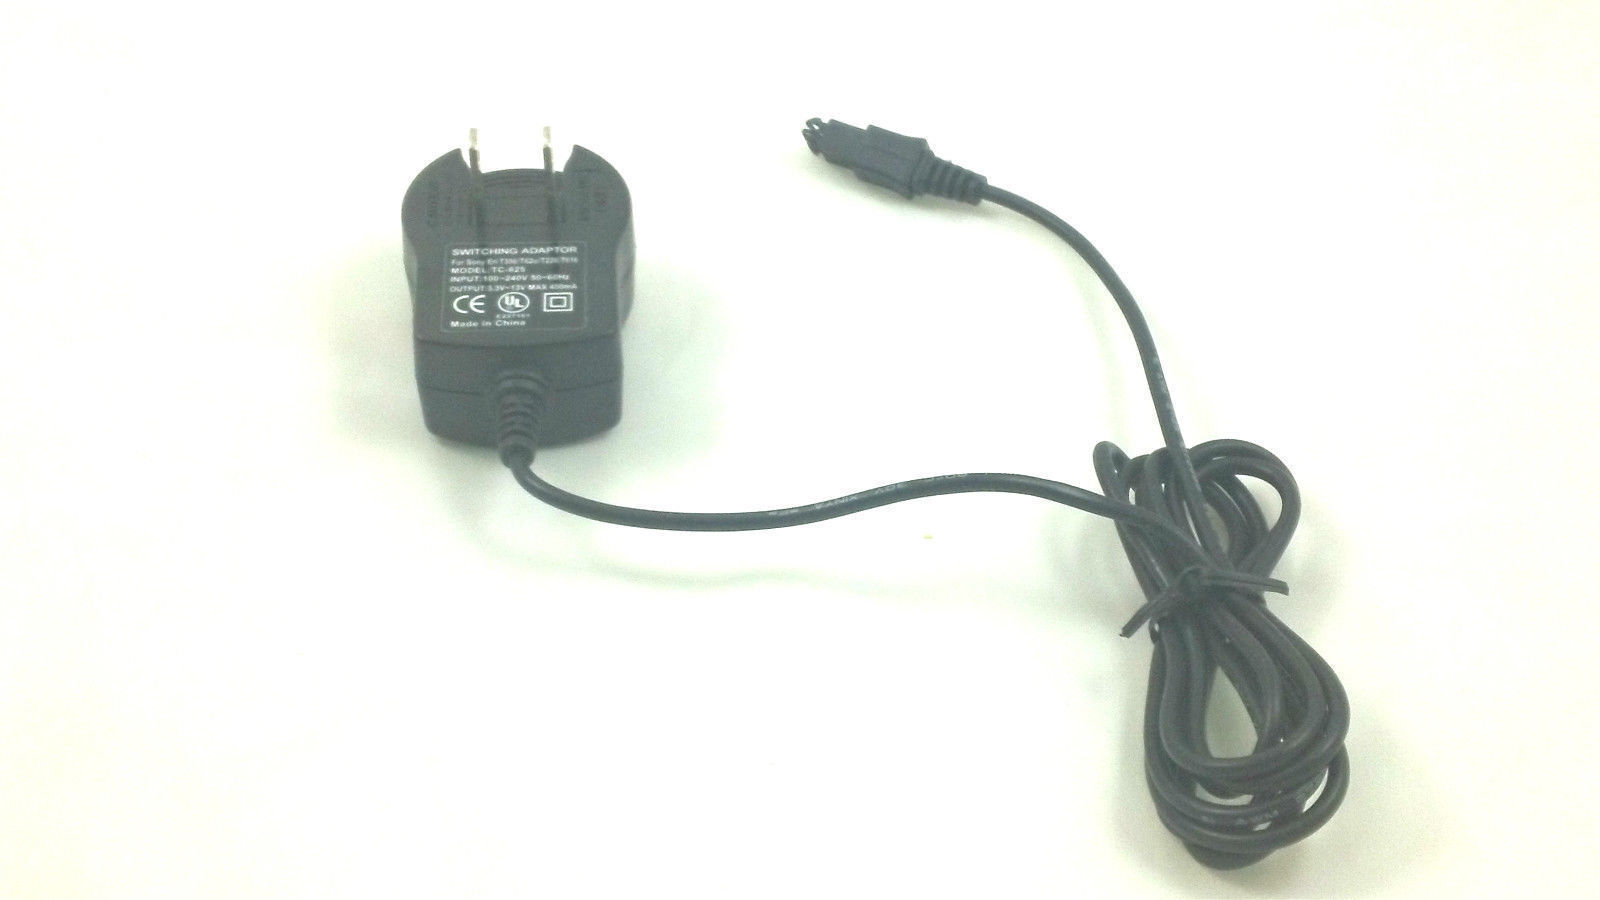 Primary image for battery charger = Sony Ericsson T600 T300 cell phone wall plug power adapter PSU